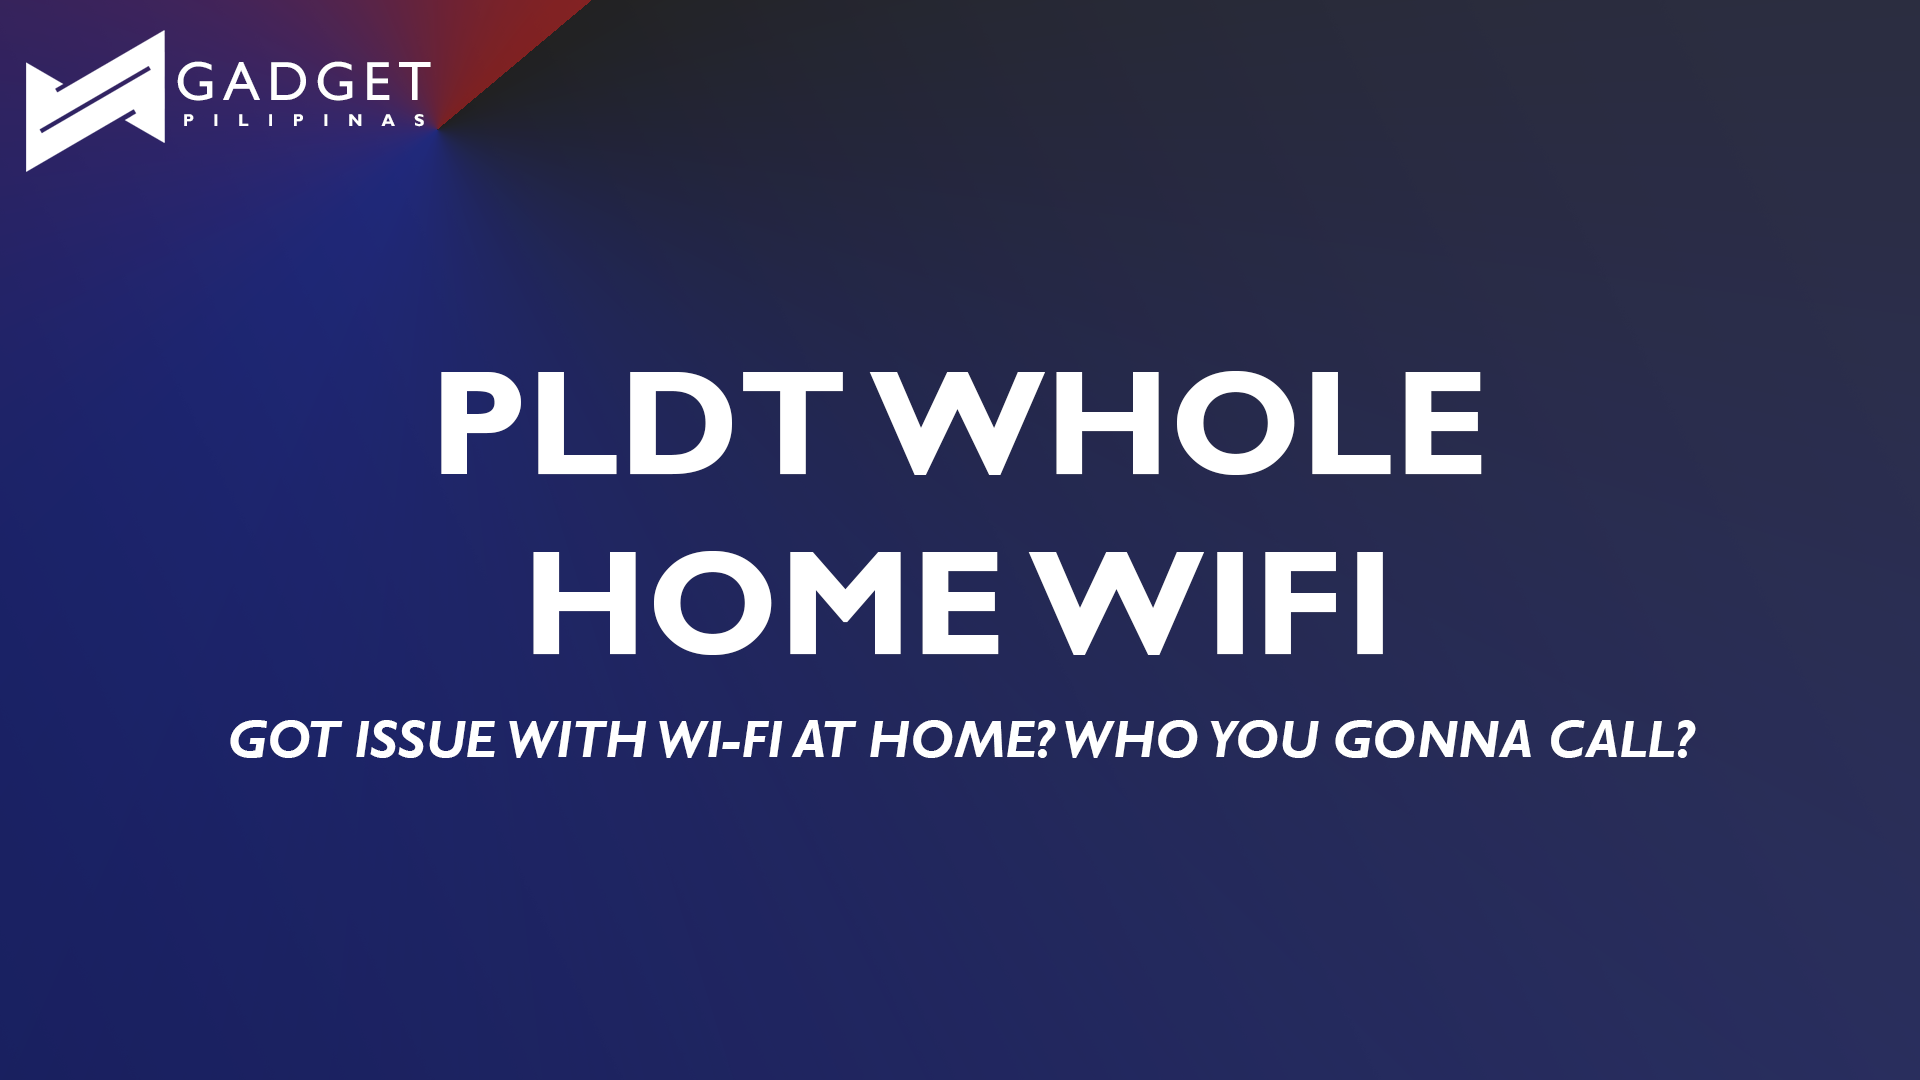 Wifi dead spots begone with PLDT’s whole home wi-fi solution